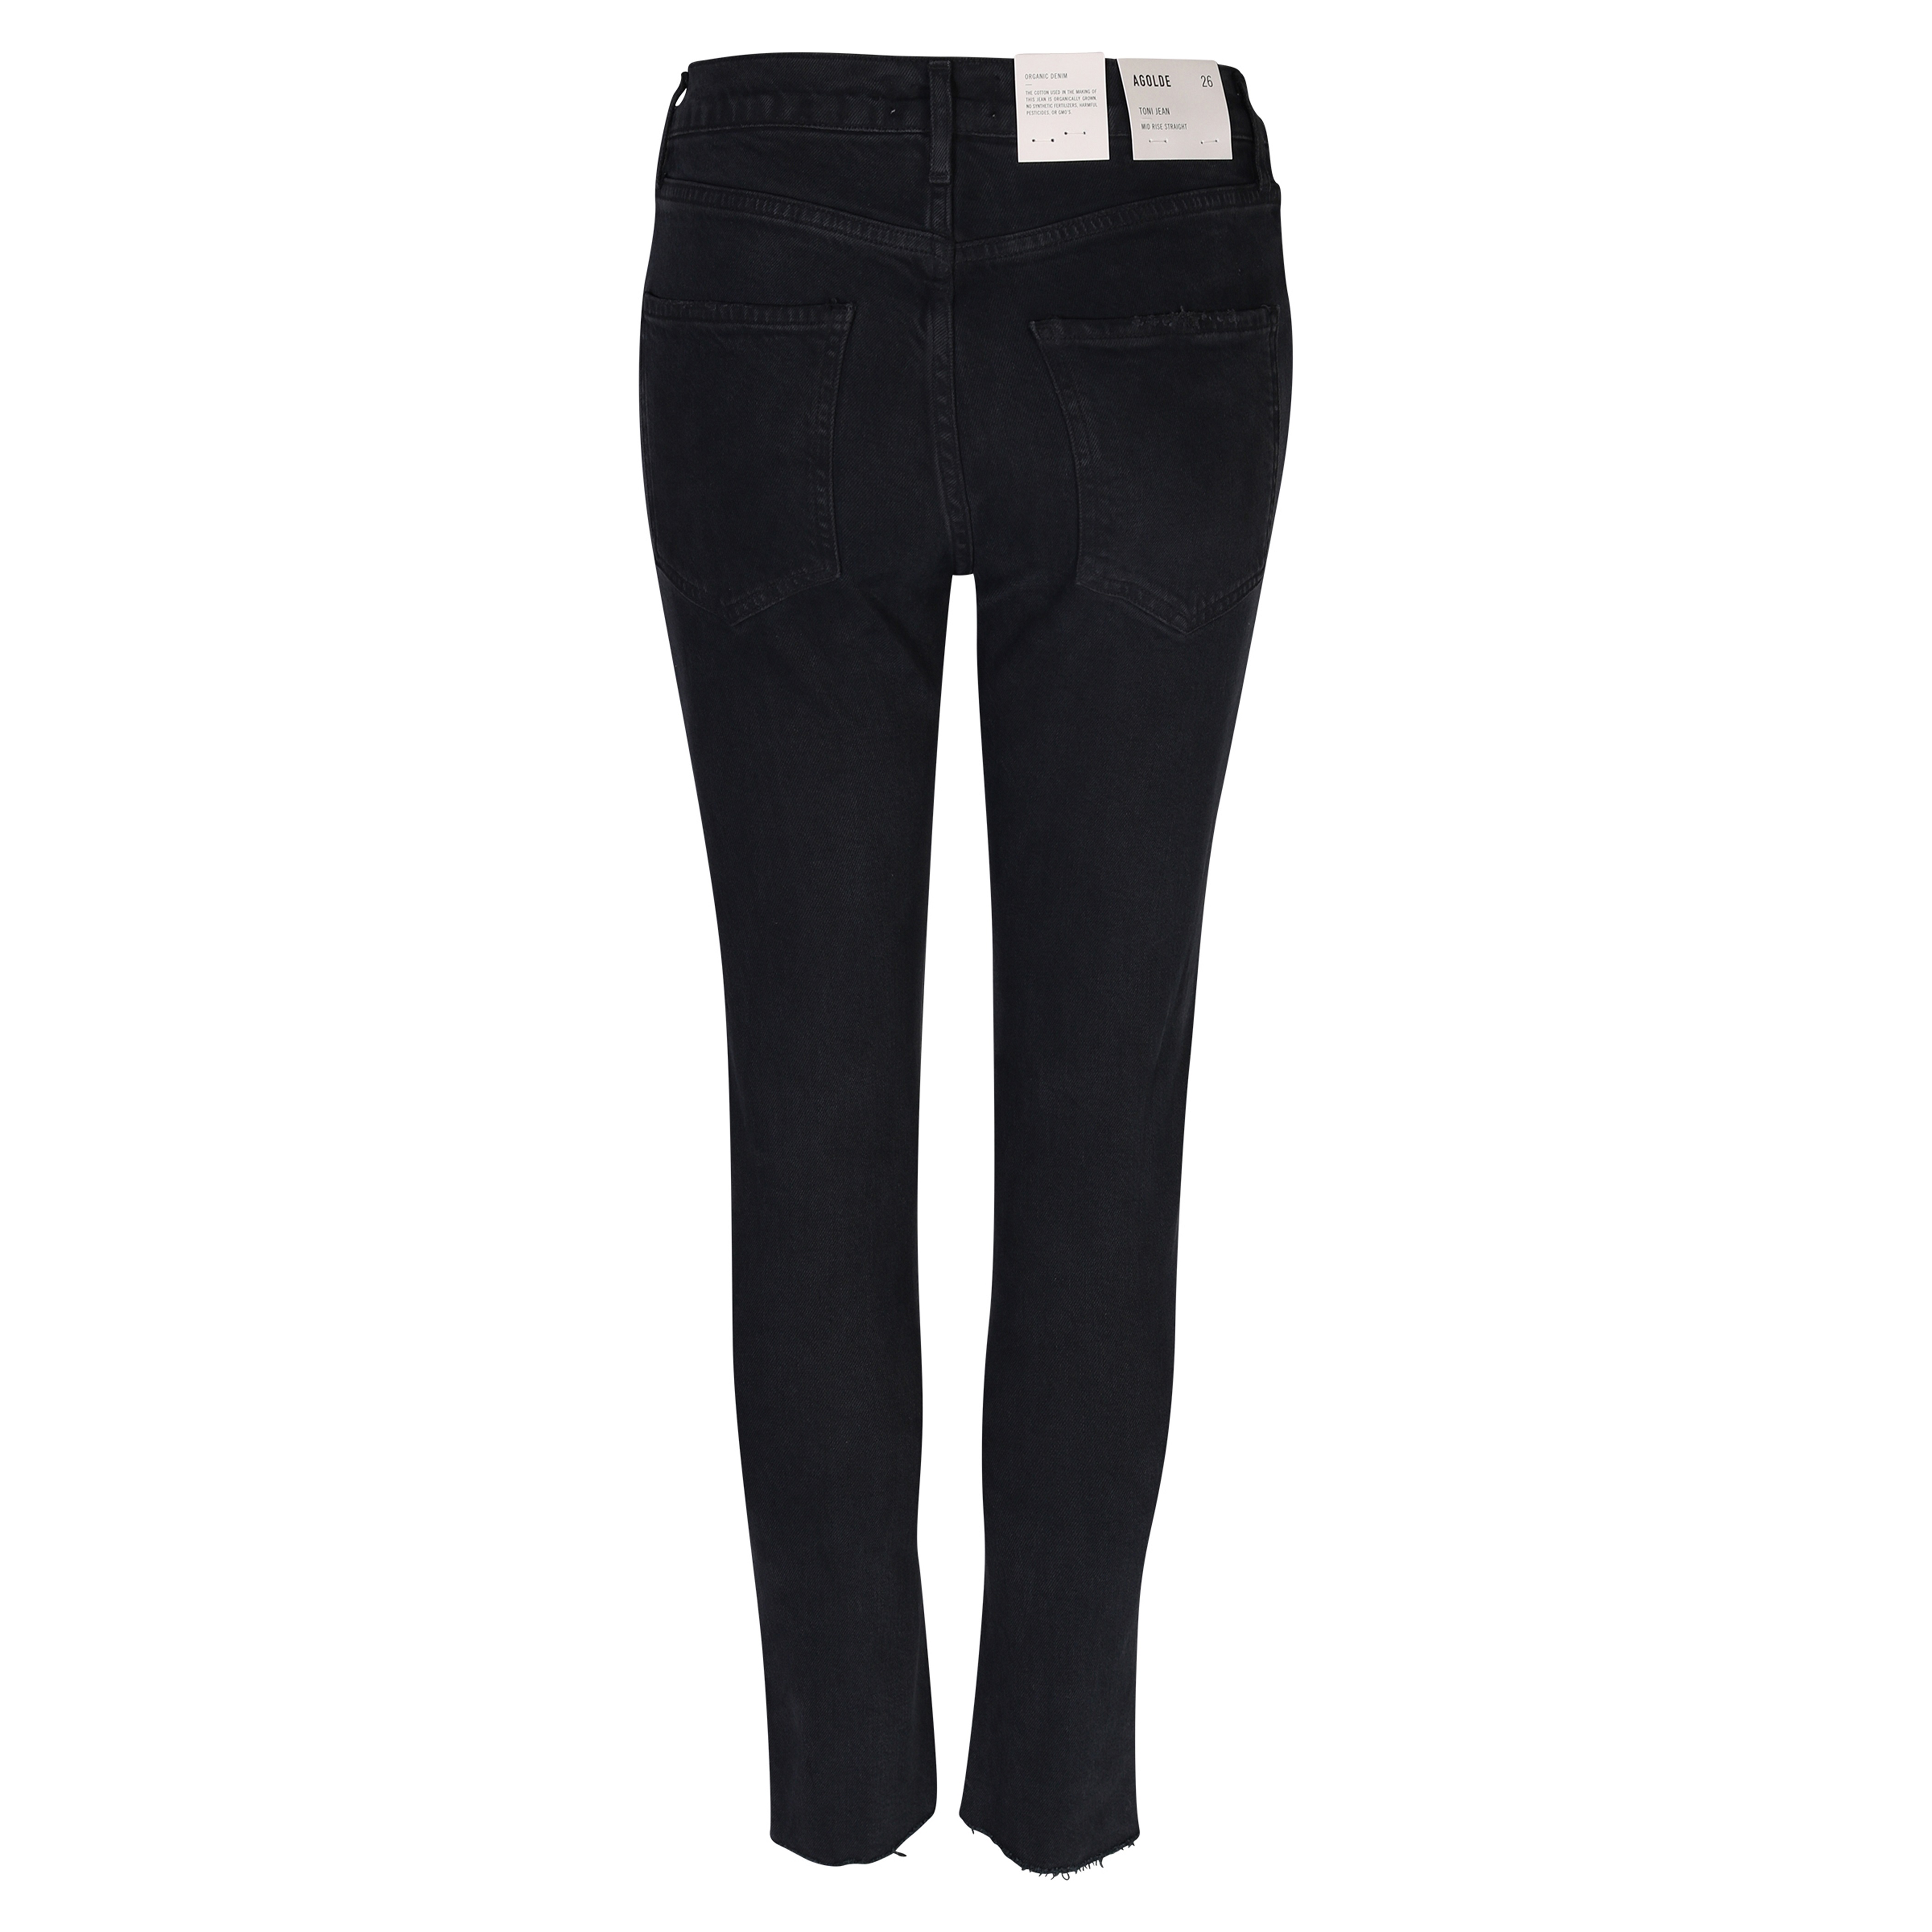 Agolde Jeans Toni Mid Rise Straight in Vintage Black 24